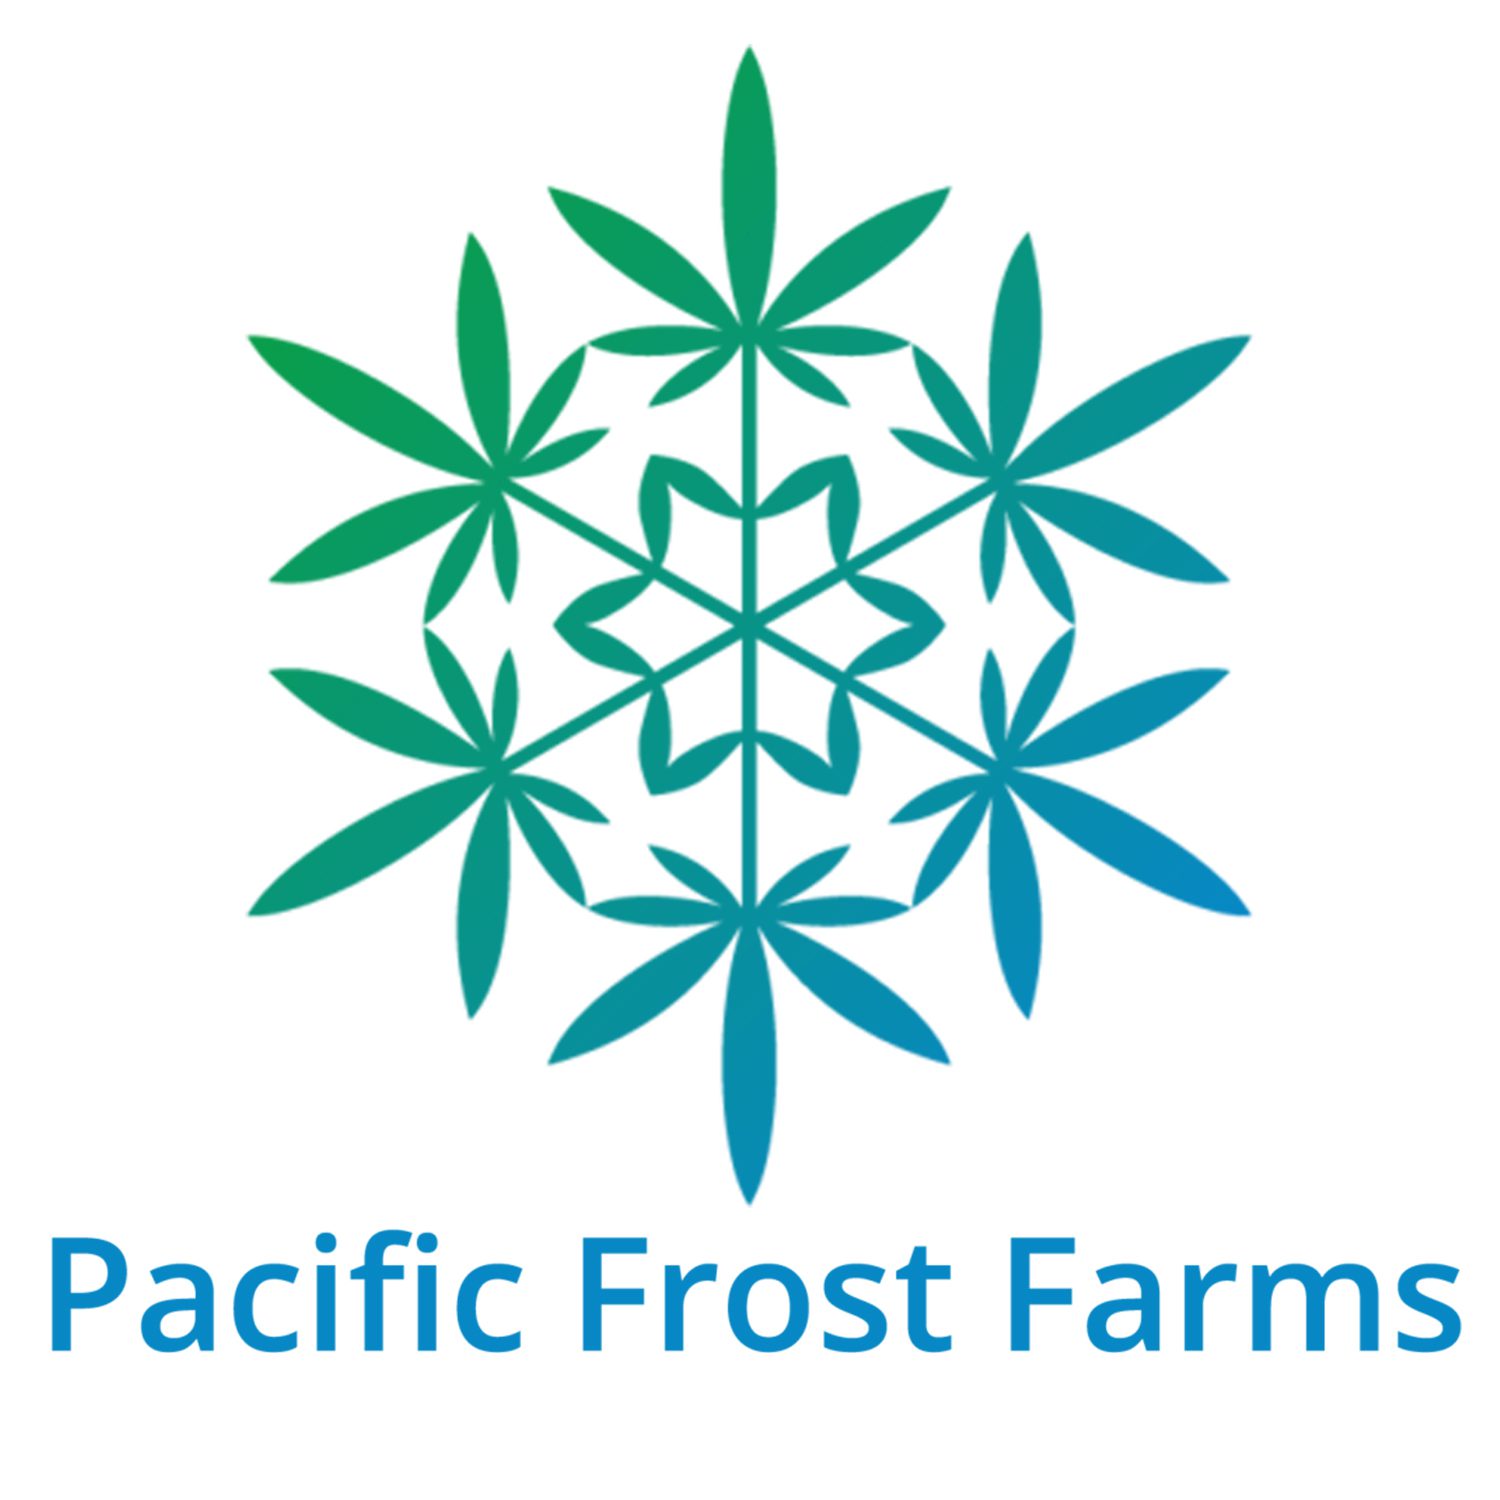 Pacific Frost Farms